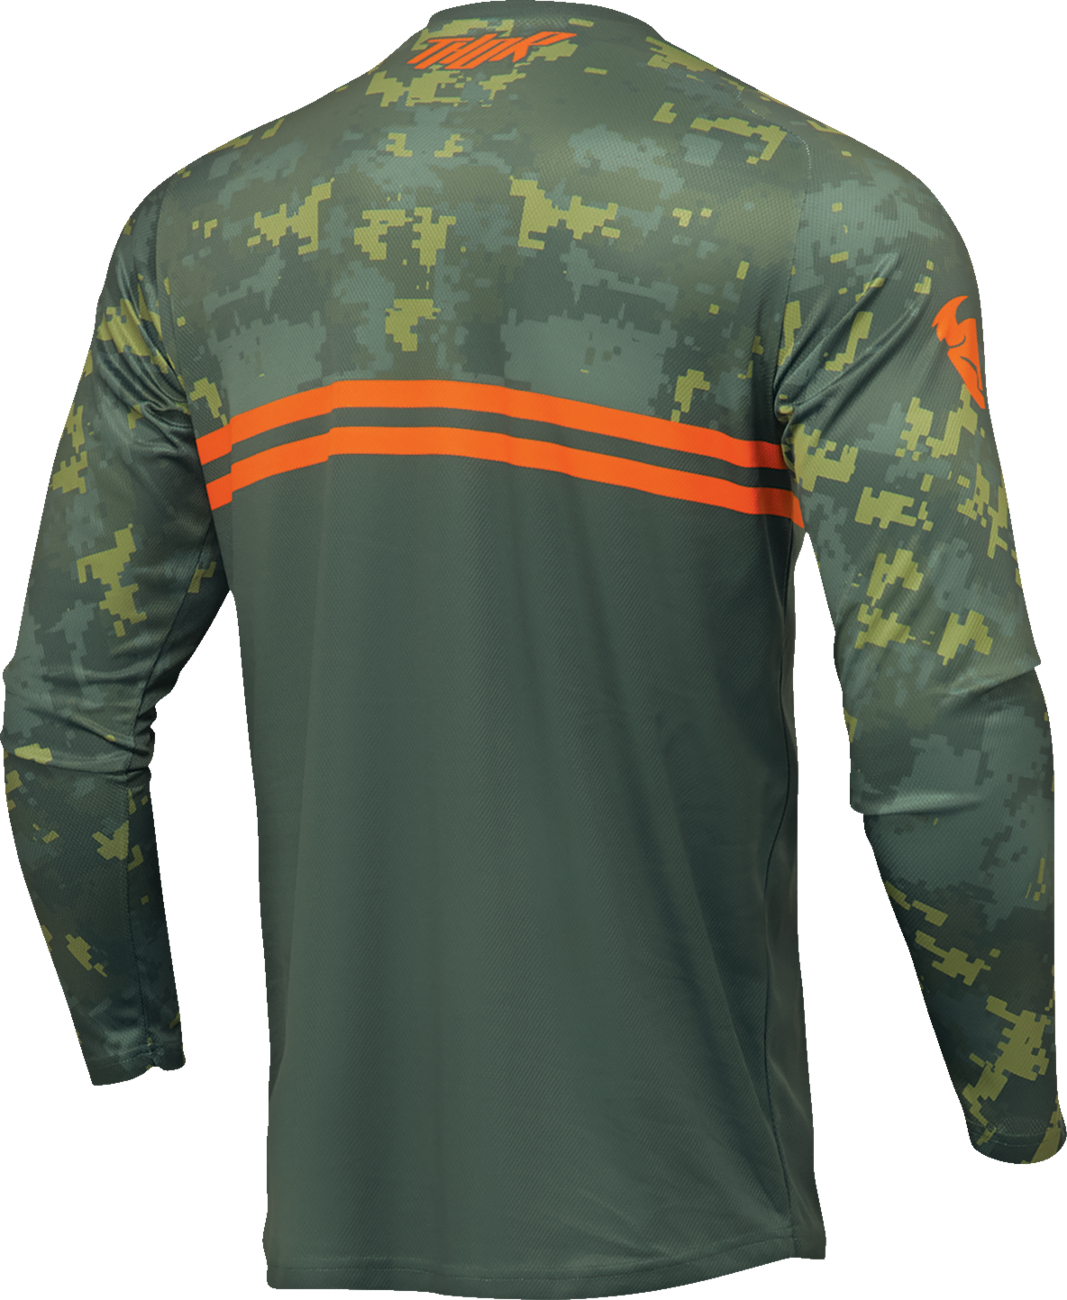 THOR Youth Sector DIGI Jersey - Green - 2XS 2912-2400